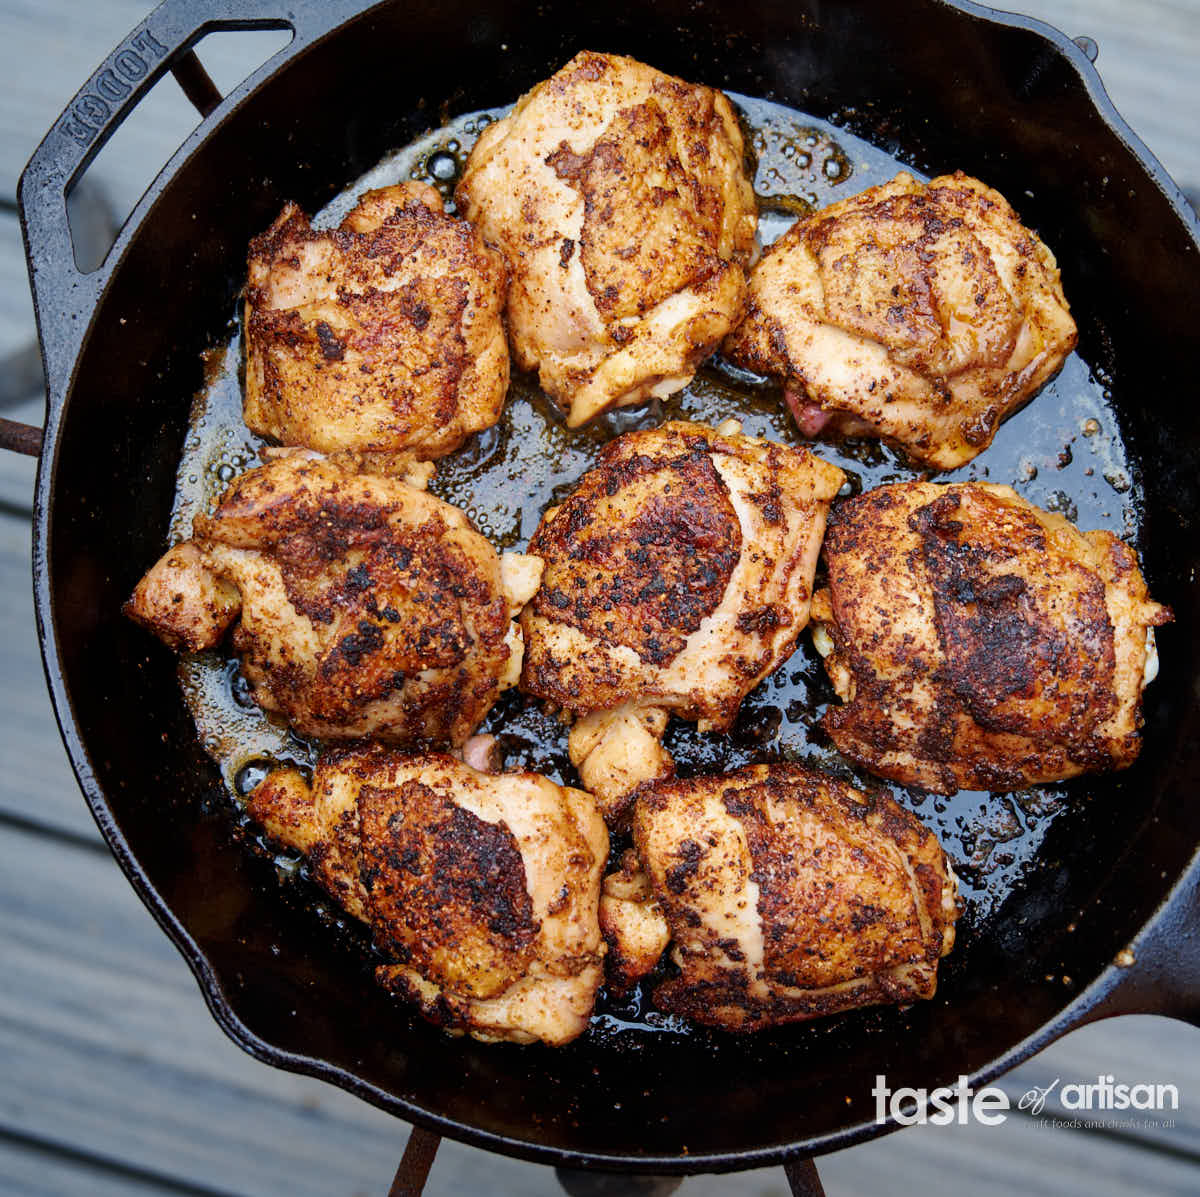 Sking on chicken thighs quickly pan-seated on a pan until golden-brown, crispy skin.